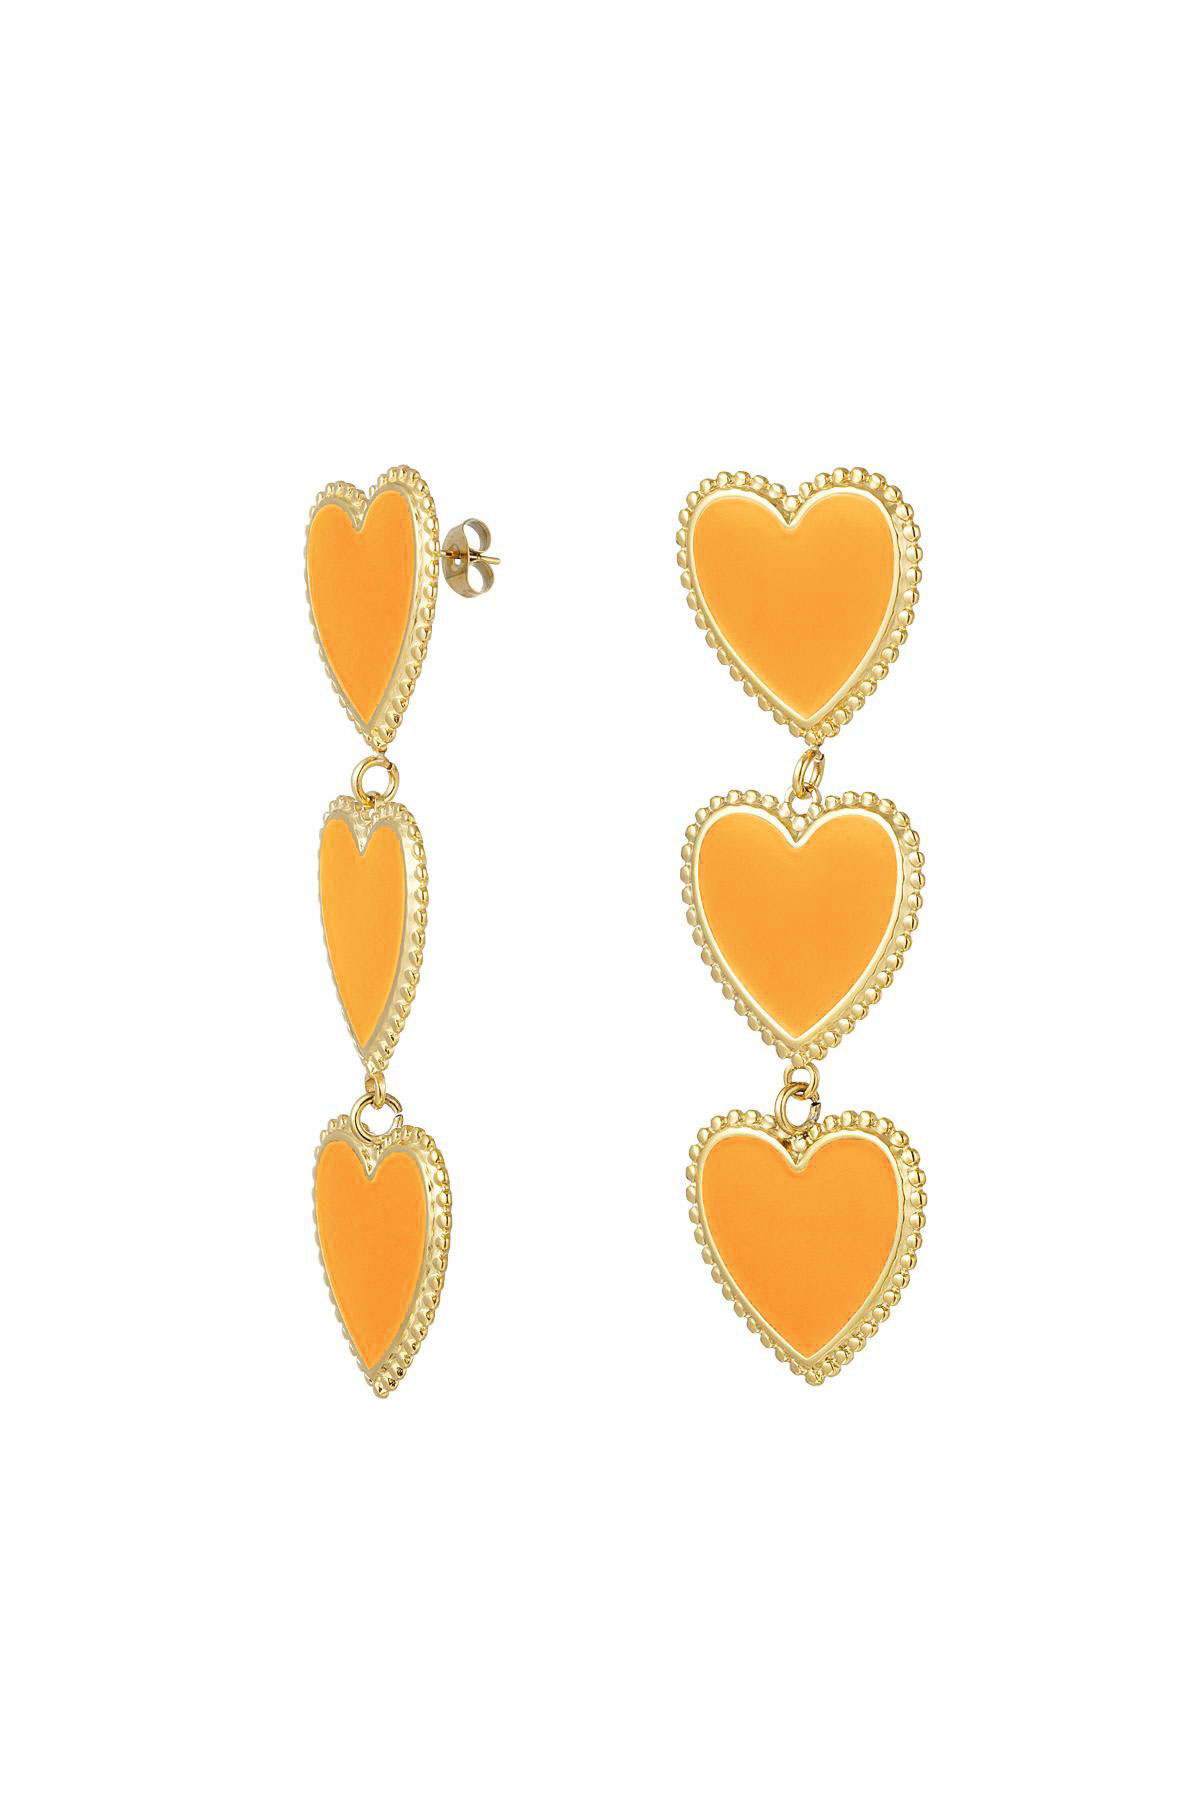 Earrings three graceful hearts in a row Orange &amp; Gold Stainless Steel